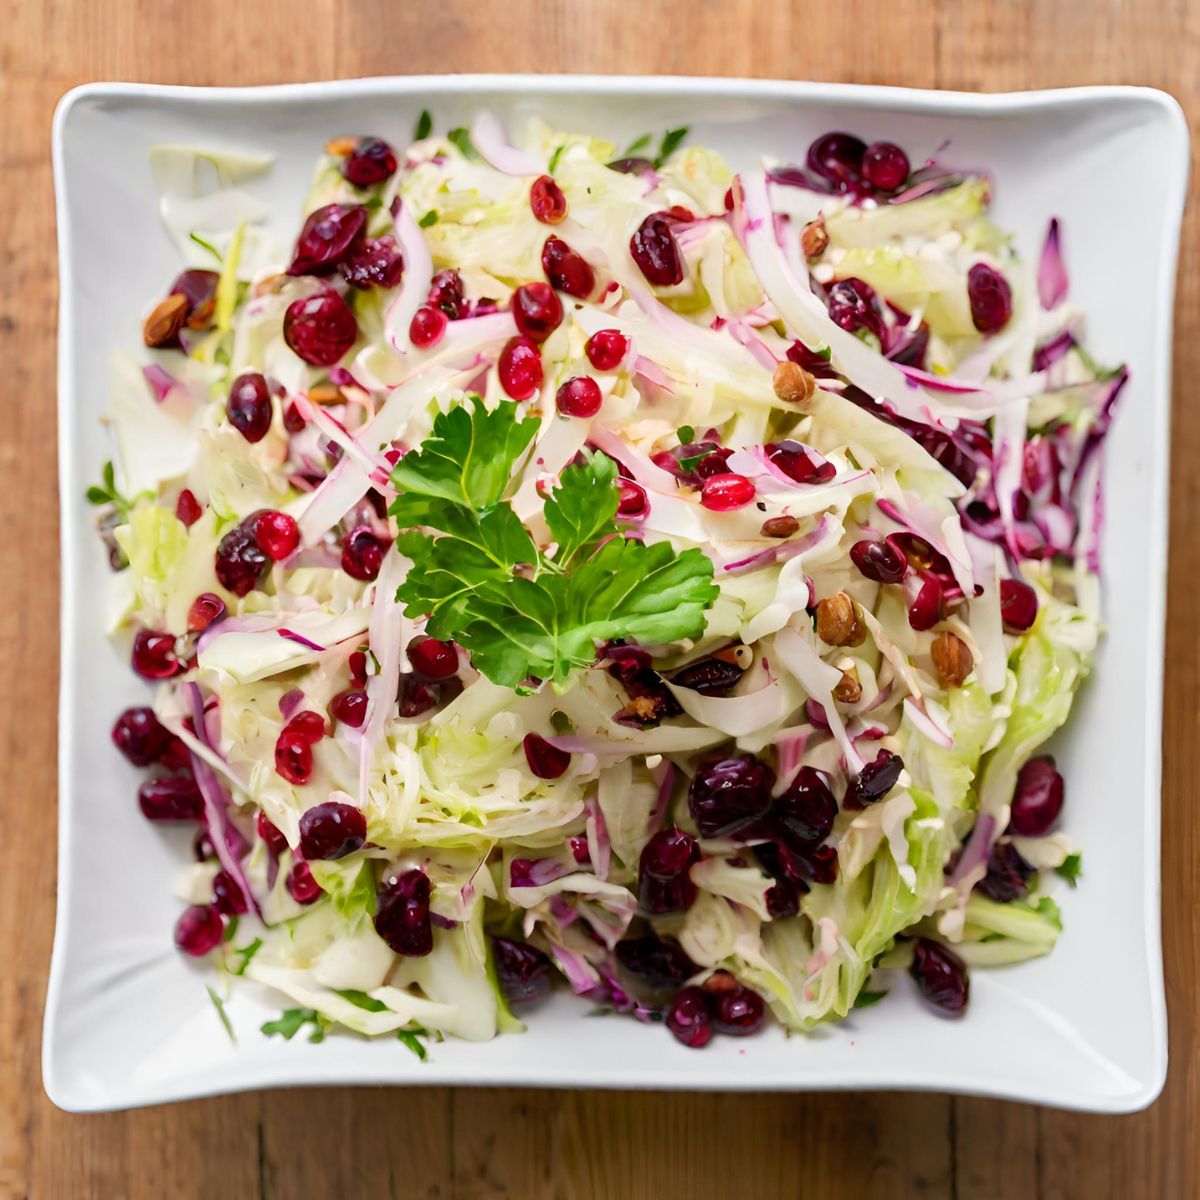 Cranberry Crunch Cabbage Salad (Tasty Tangy Twist!)